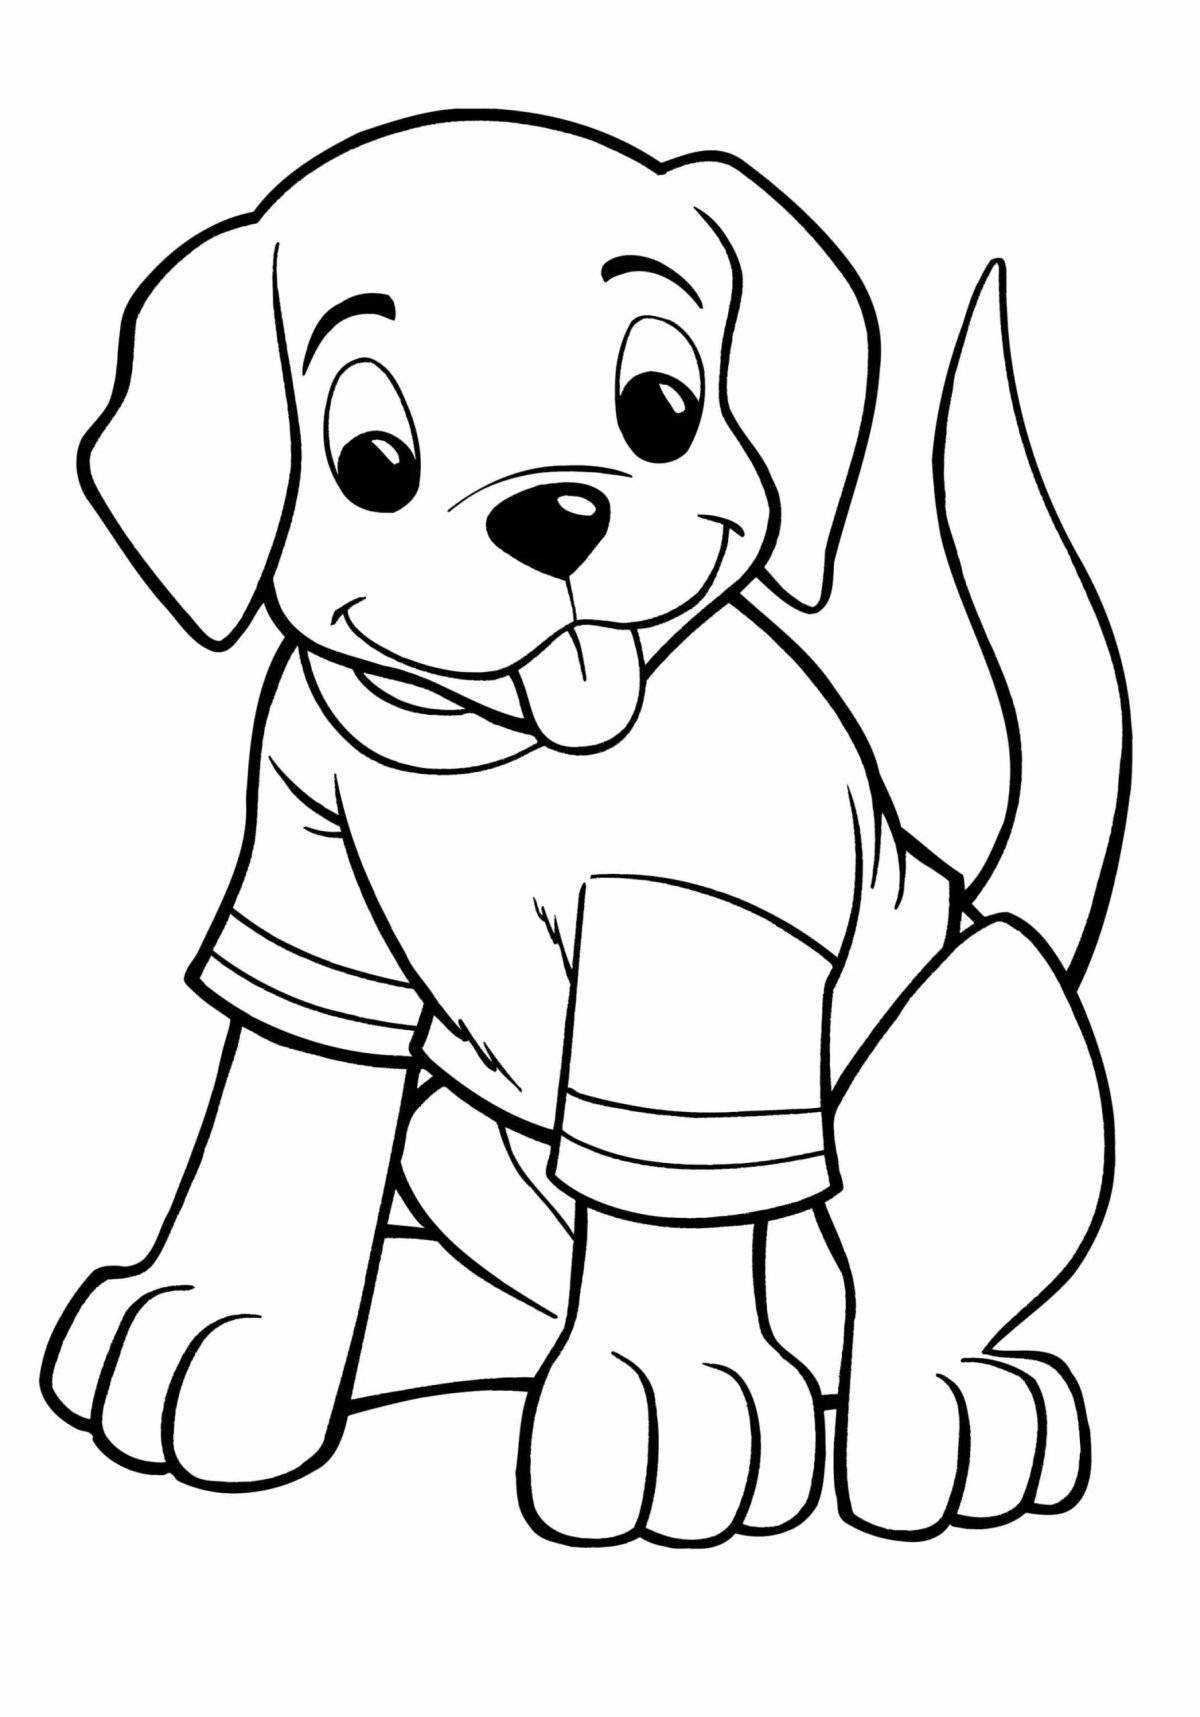 Great dog coloring book for 4-5 year olds